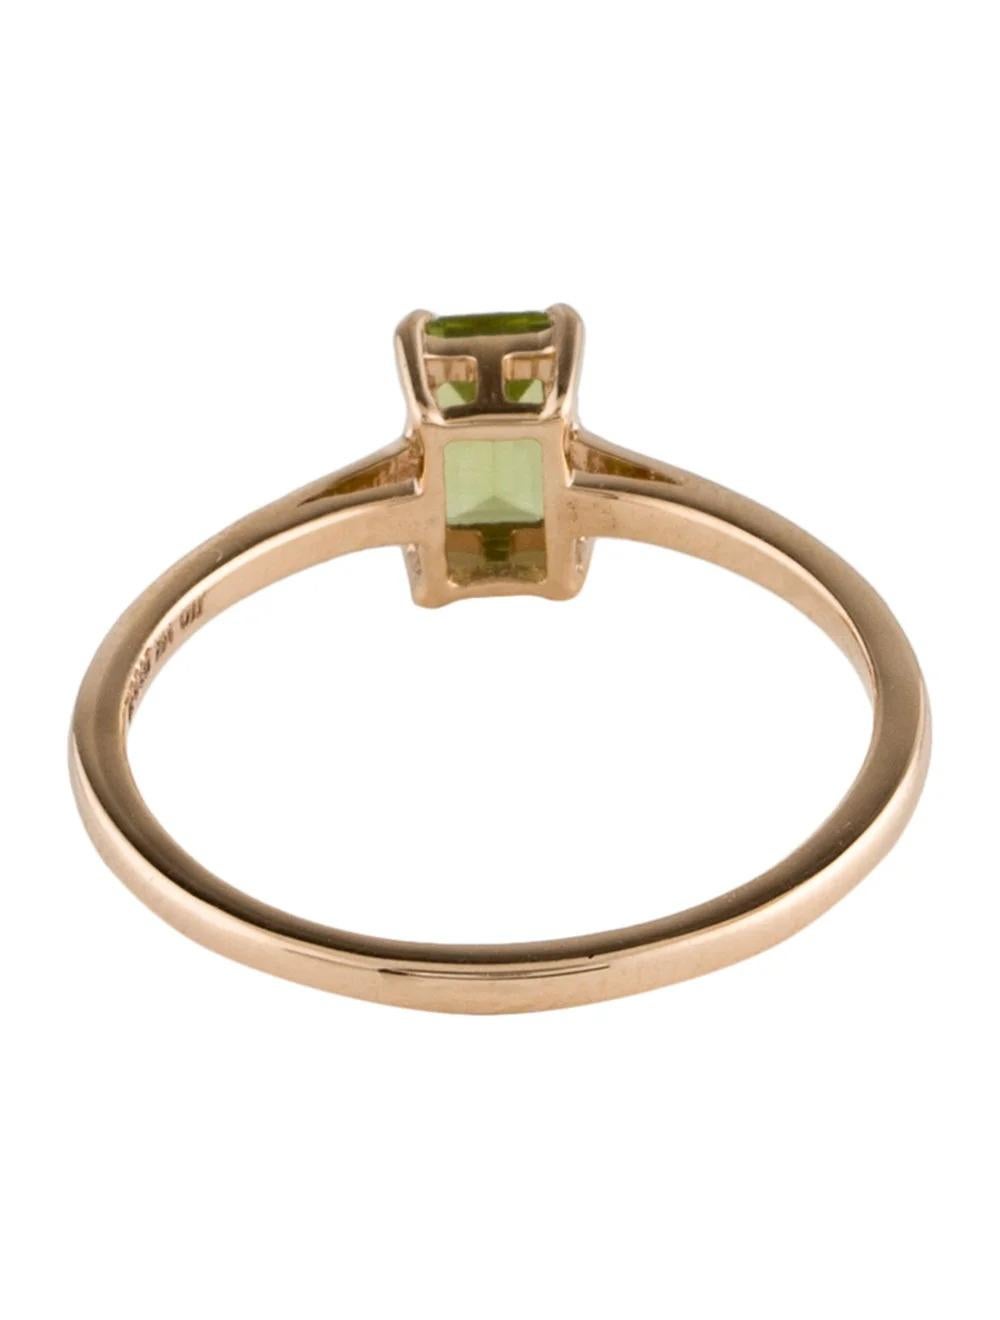 14K Peridot Cocktail Ring Size 6.75 - Green Gemstone, Statement Jewelry In New Condition For Sale In Holtsville, NY